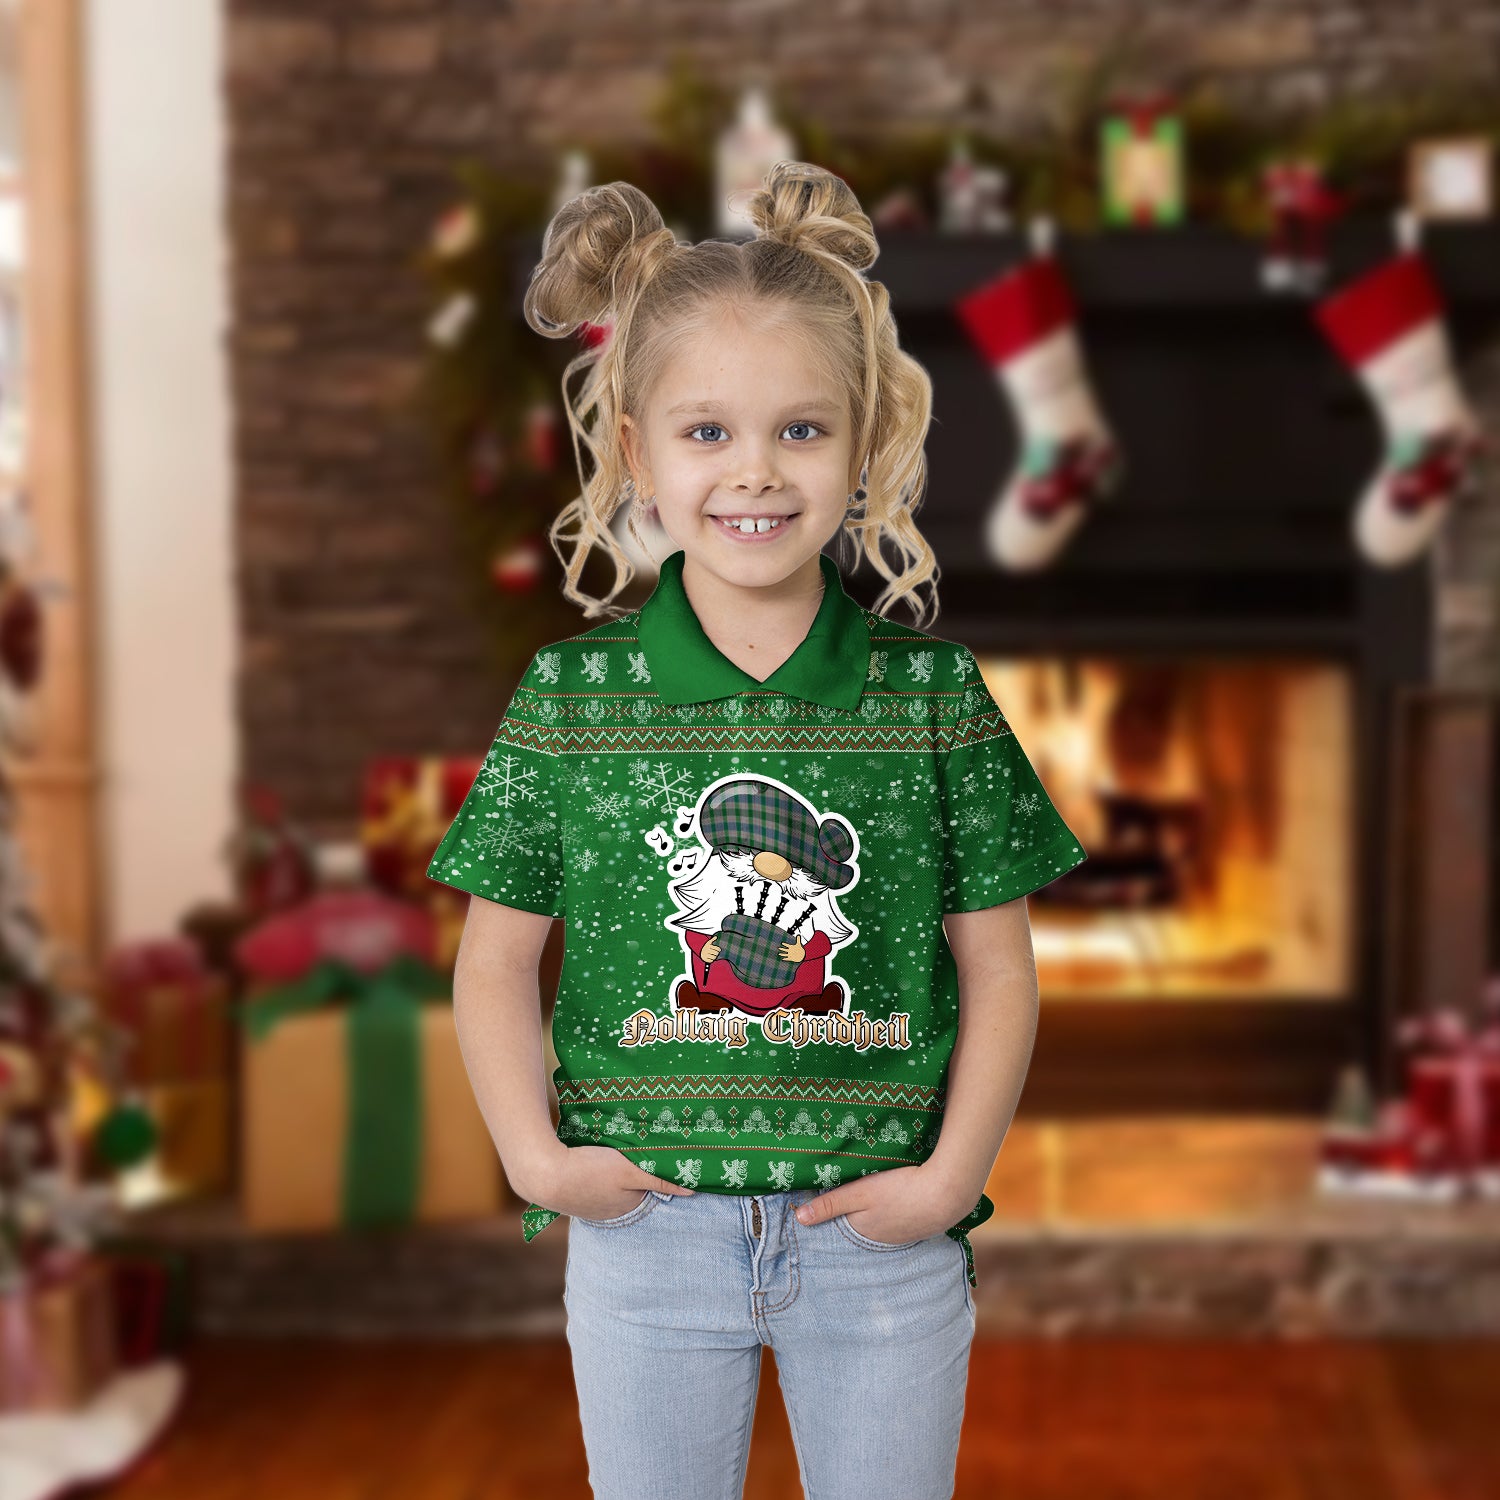 Lloyd of Wales Clan Christmas Family Polo Shirt with Funny Gnome Playing Bagpipes Kid's Polo Shirt Green - Tartanvibesclothing